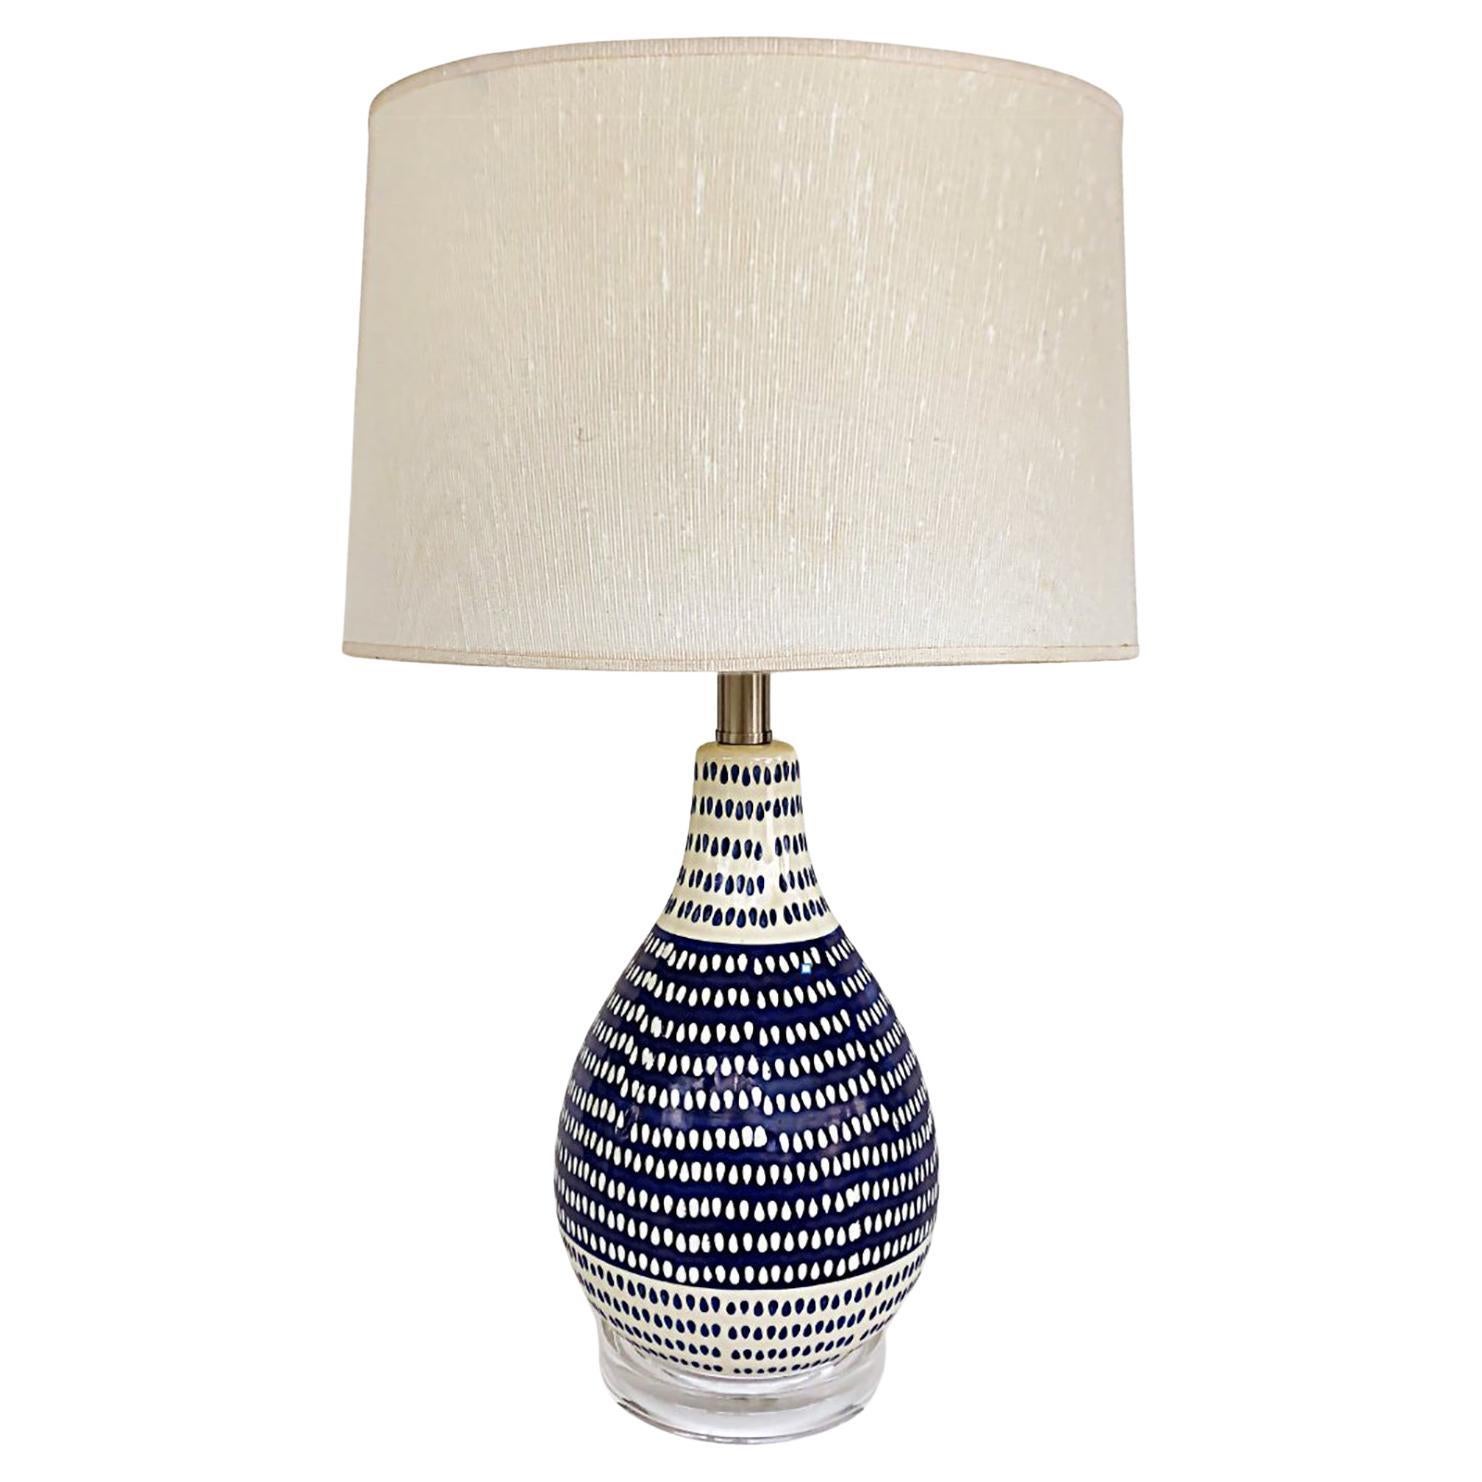 Mid-Century Cobalt Blue, White Ceramic Table Lamp, Lucite Base and Finial